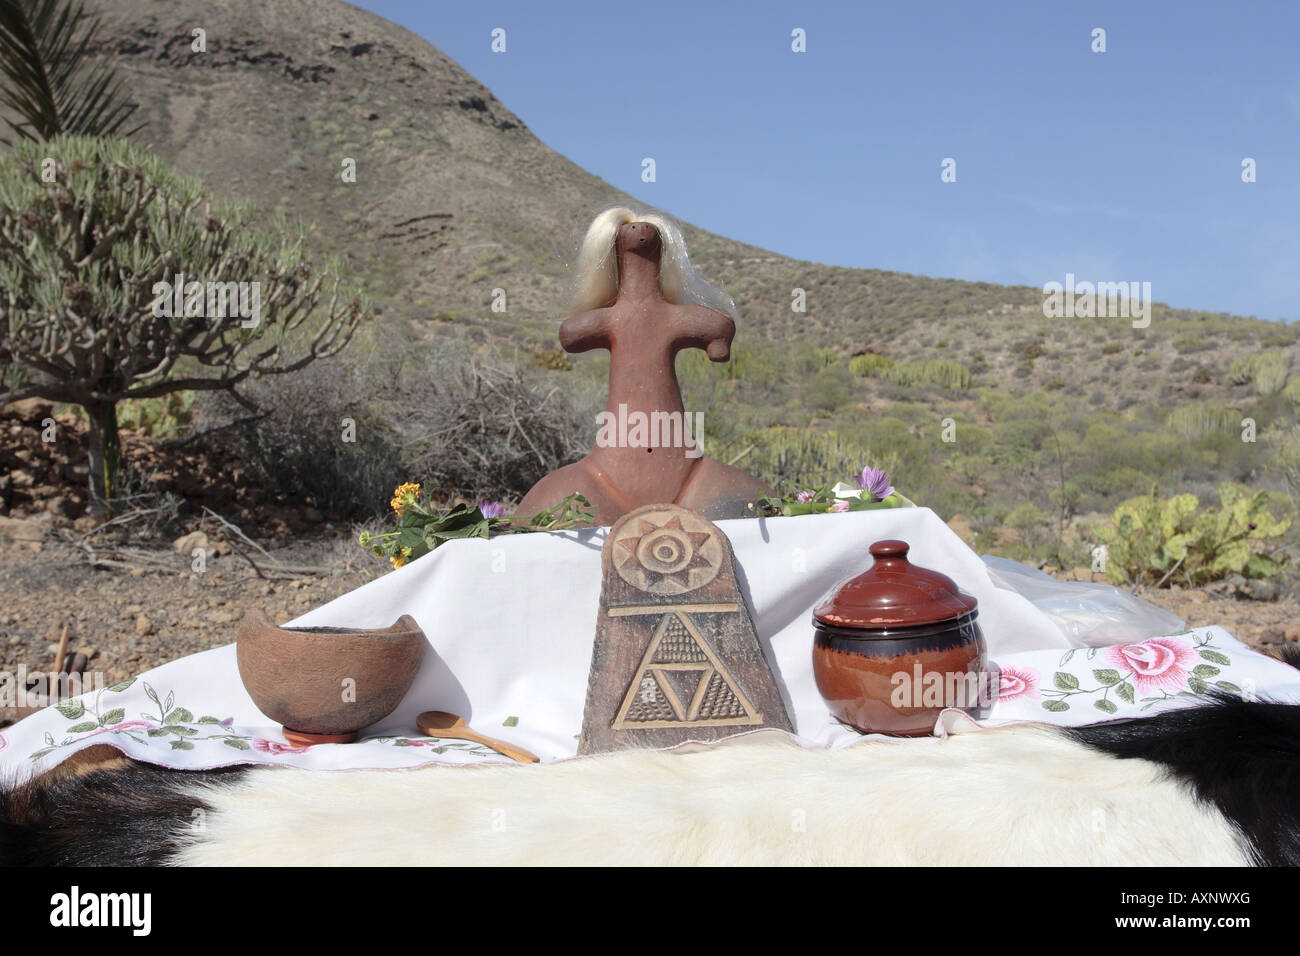 Altar covered with a goat skin and decorated with fertility symbols ready for a Guanche aboriginal wedding ceremony, Tenerife, Canary Islands, Spain Stock Photo